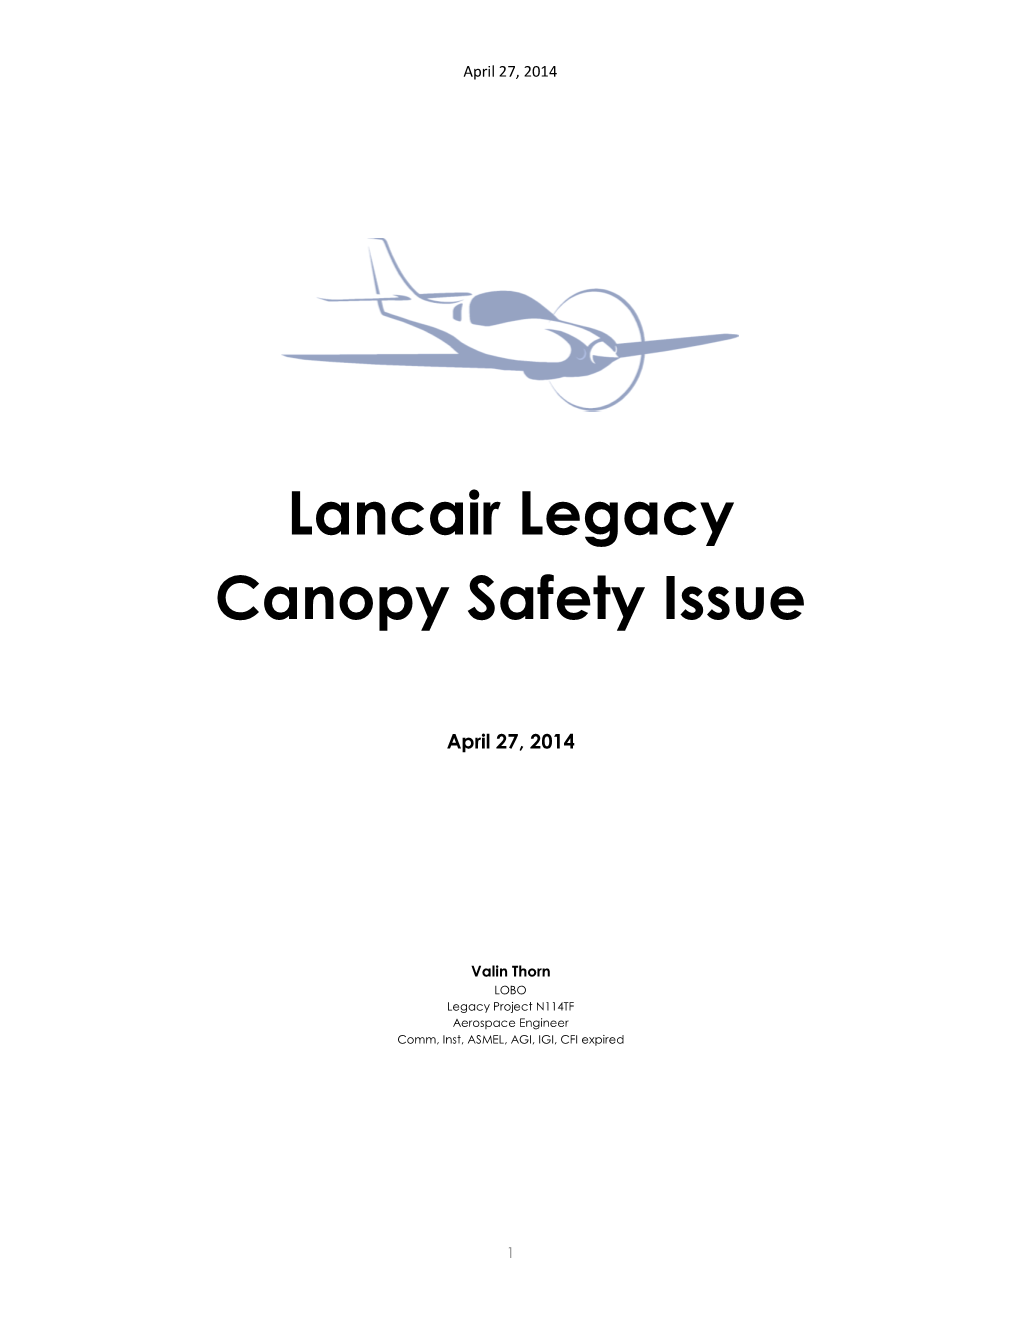 Lancair Legacy Canopy Safety Issue